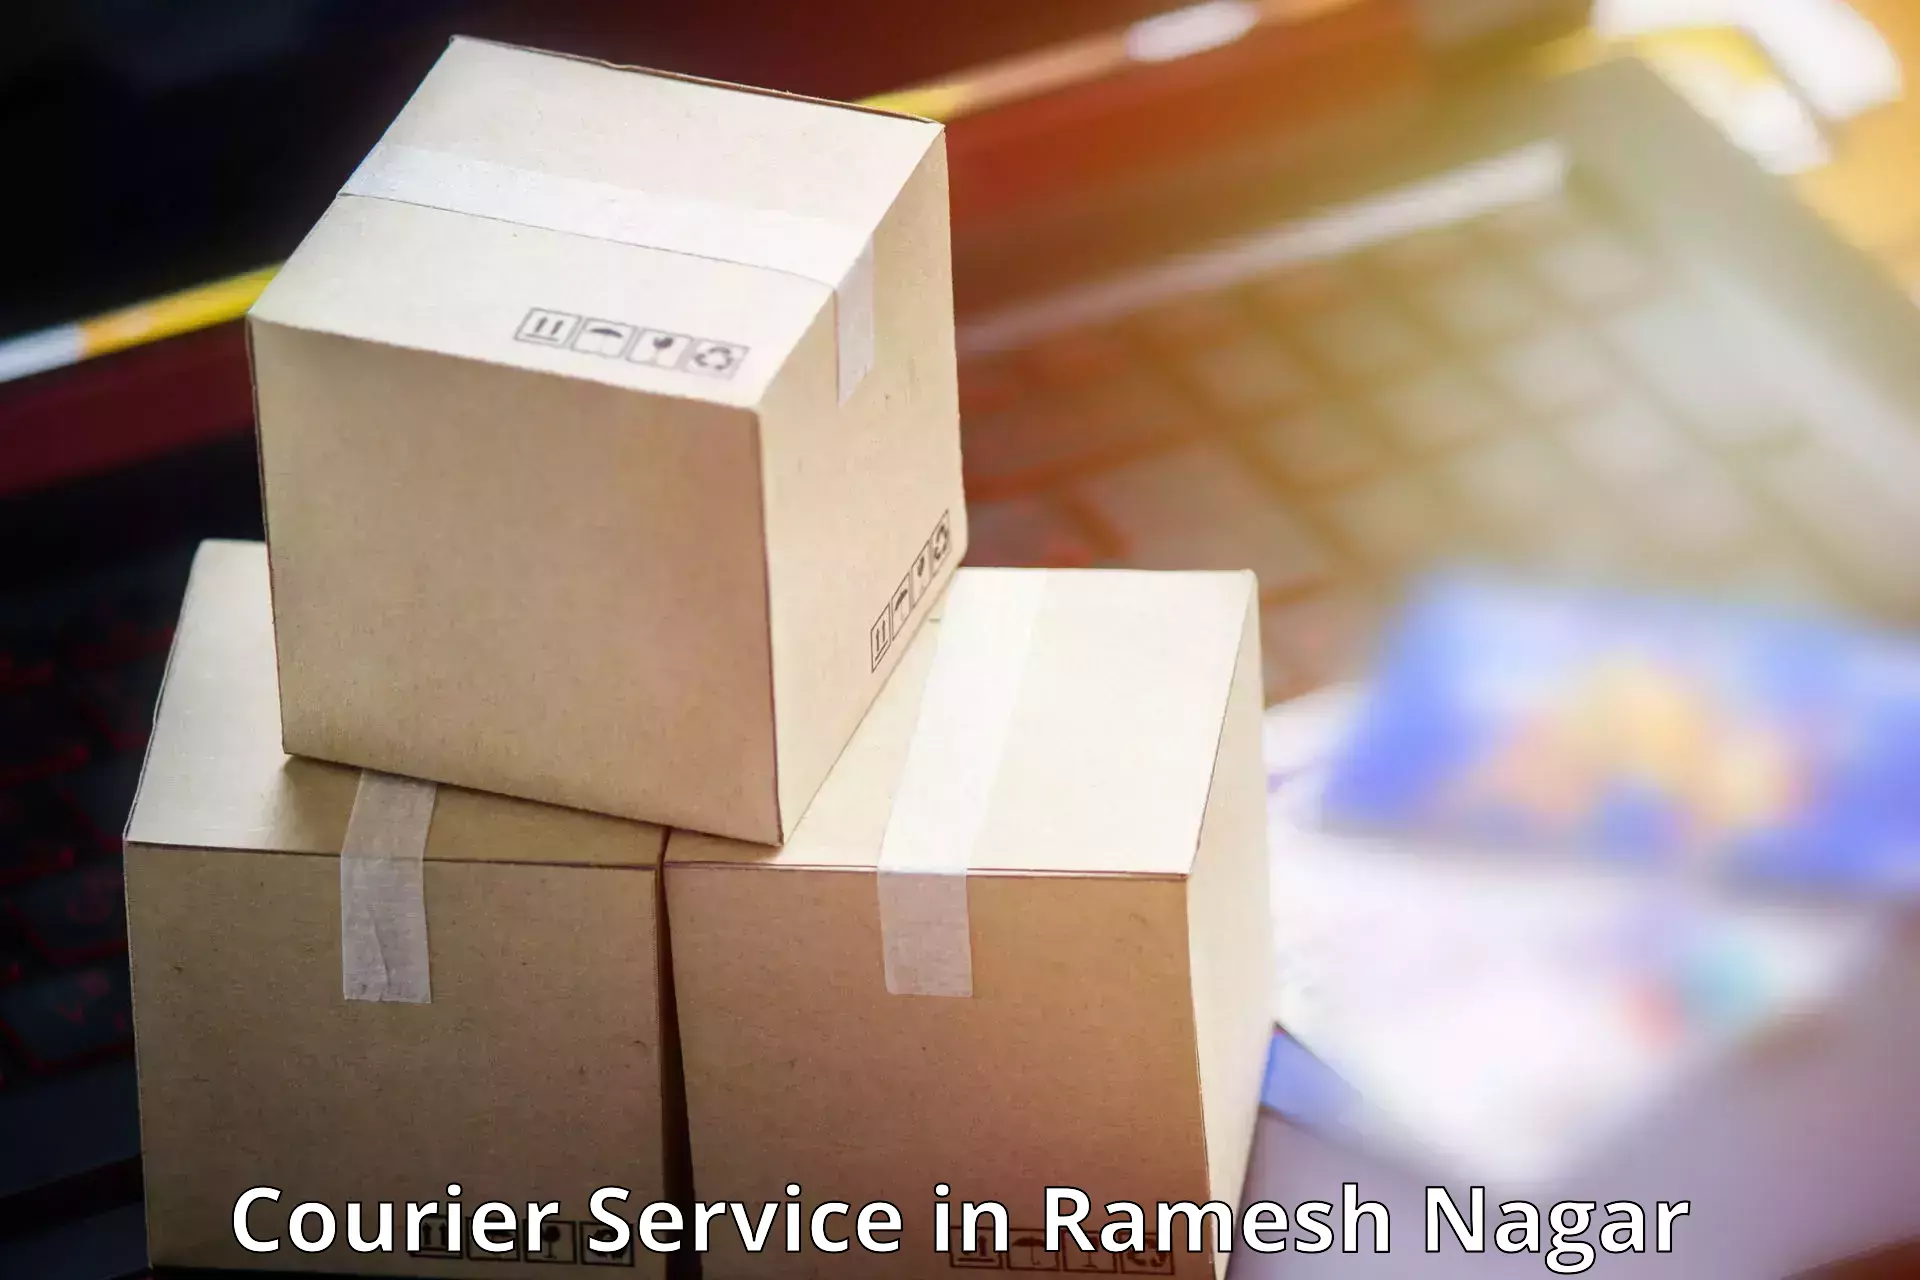 Overnight delivery services in Ramesh Nagar